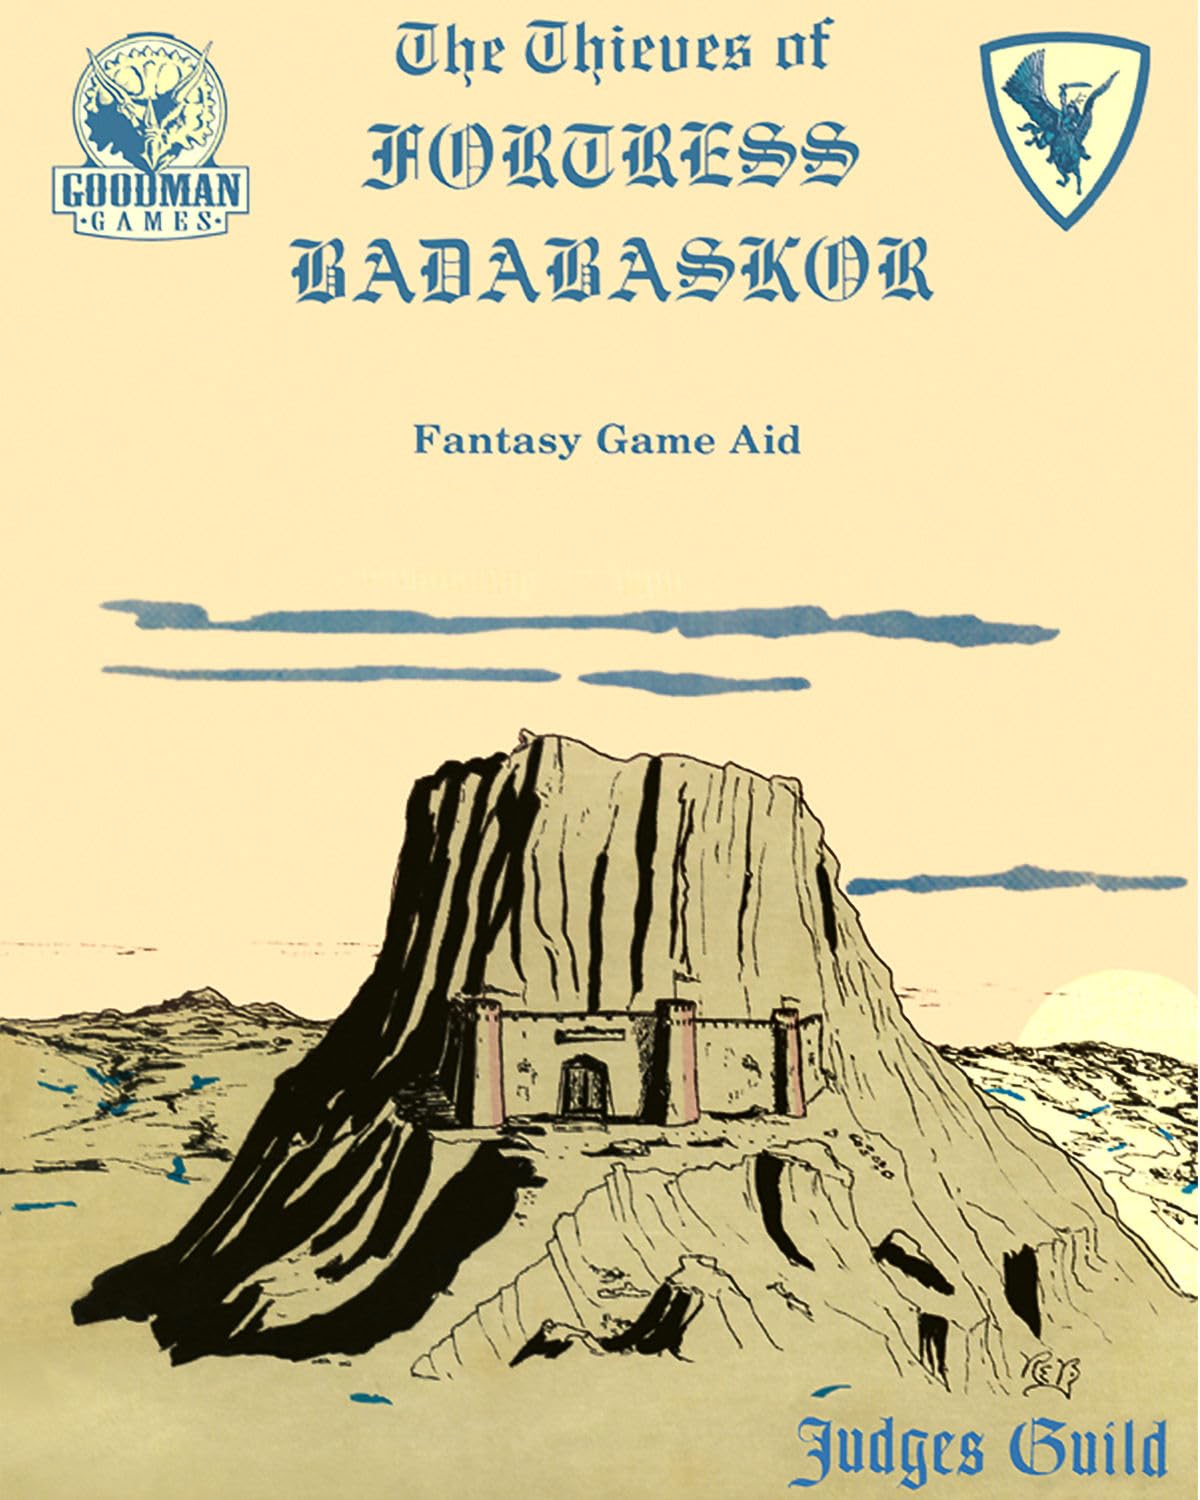 Thieves of Fortress Badabaskor - A Judge's Guild Classic Reprint (paperback)